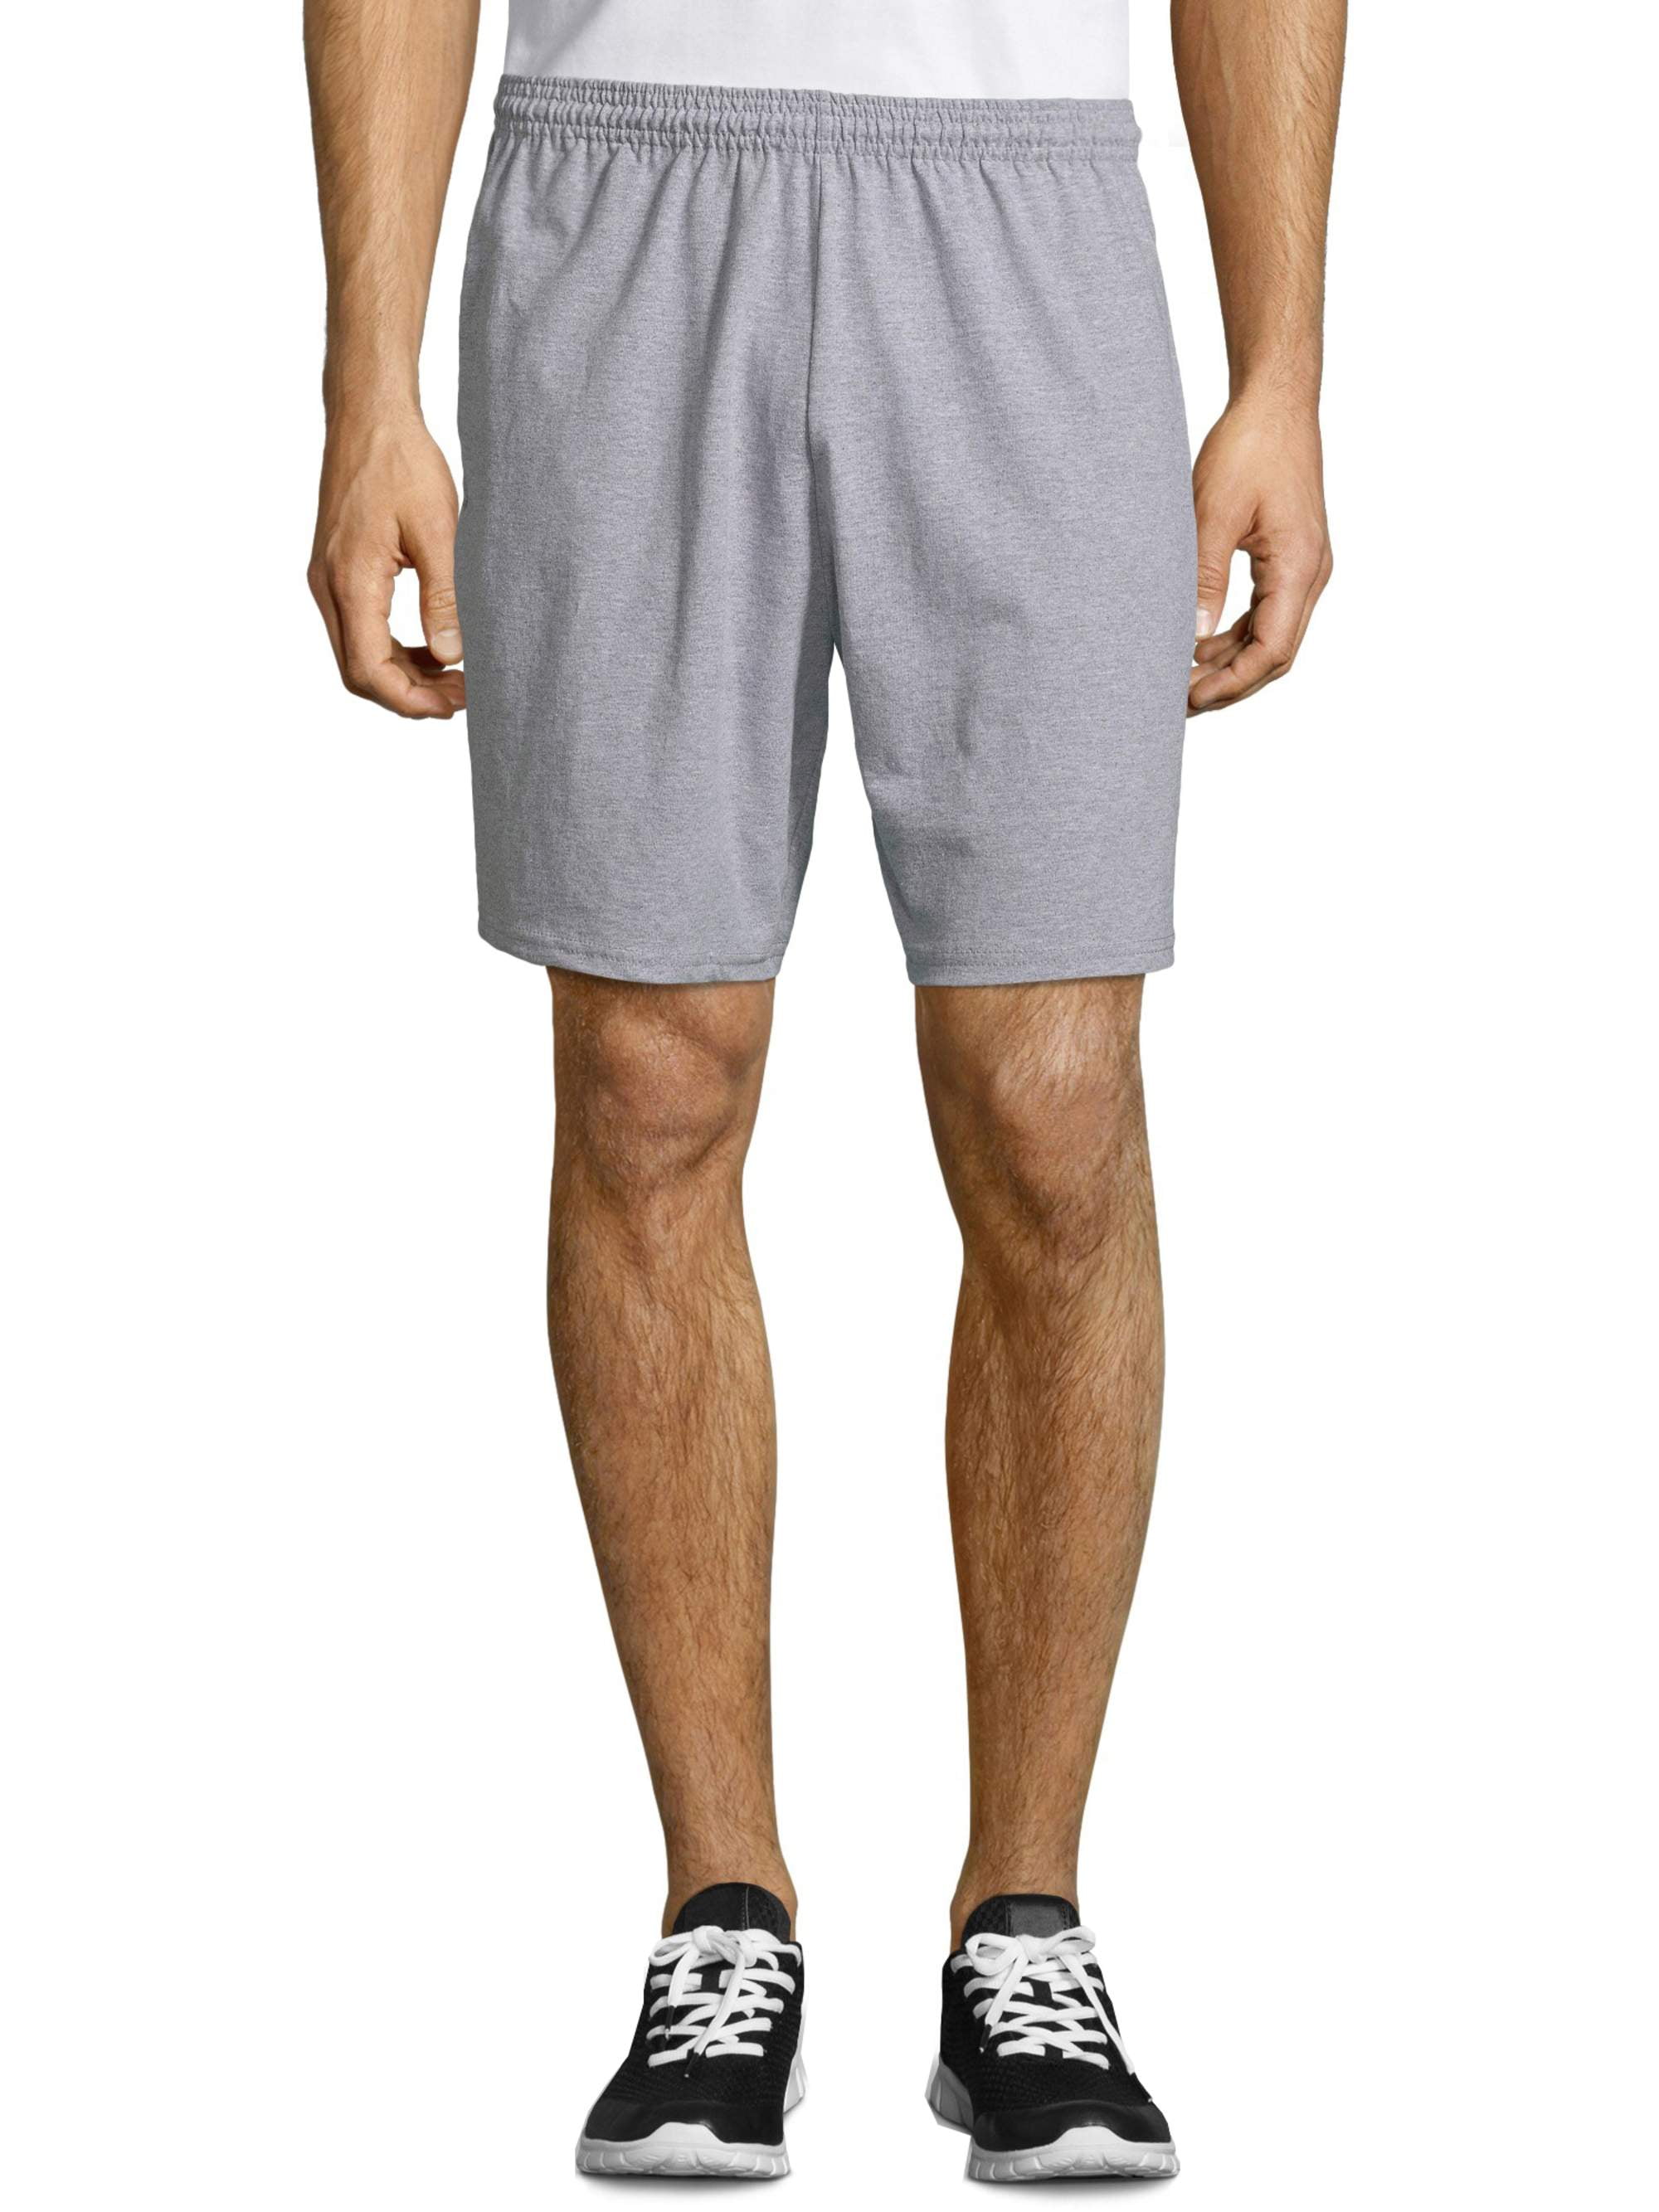 Hanes Men's and Big 7.5" Jersey Shorts, up to size 4XL - Walmart.com